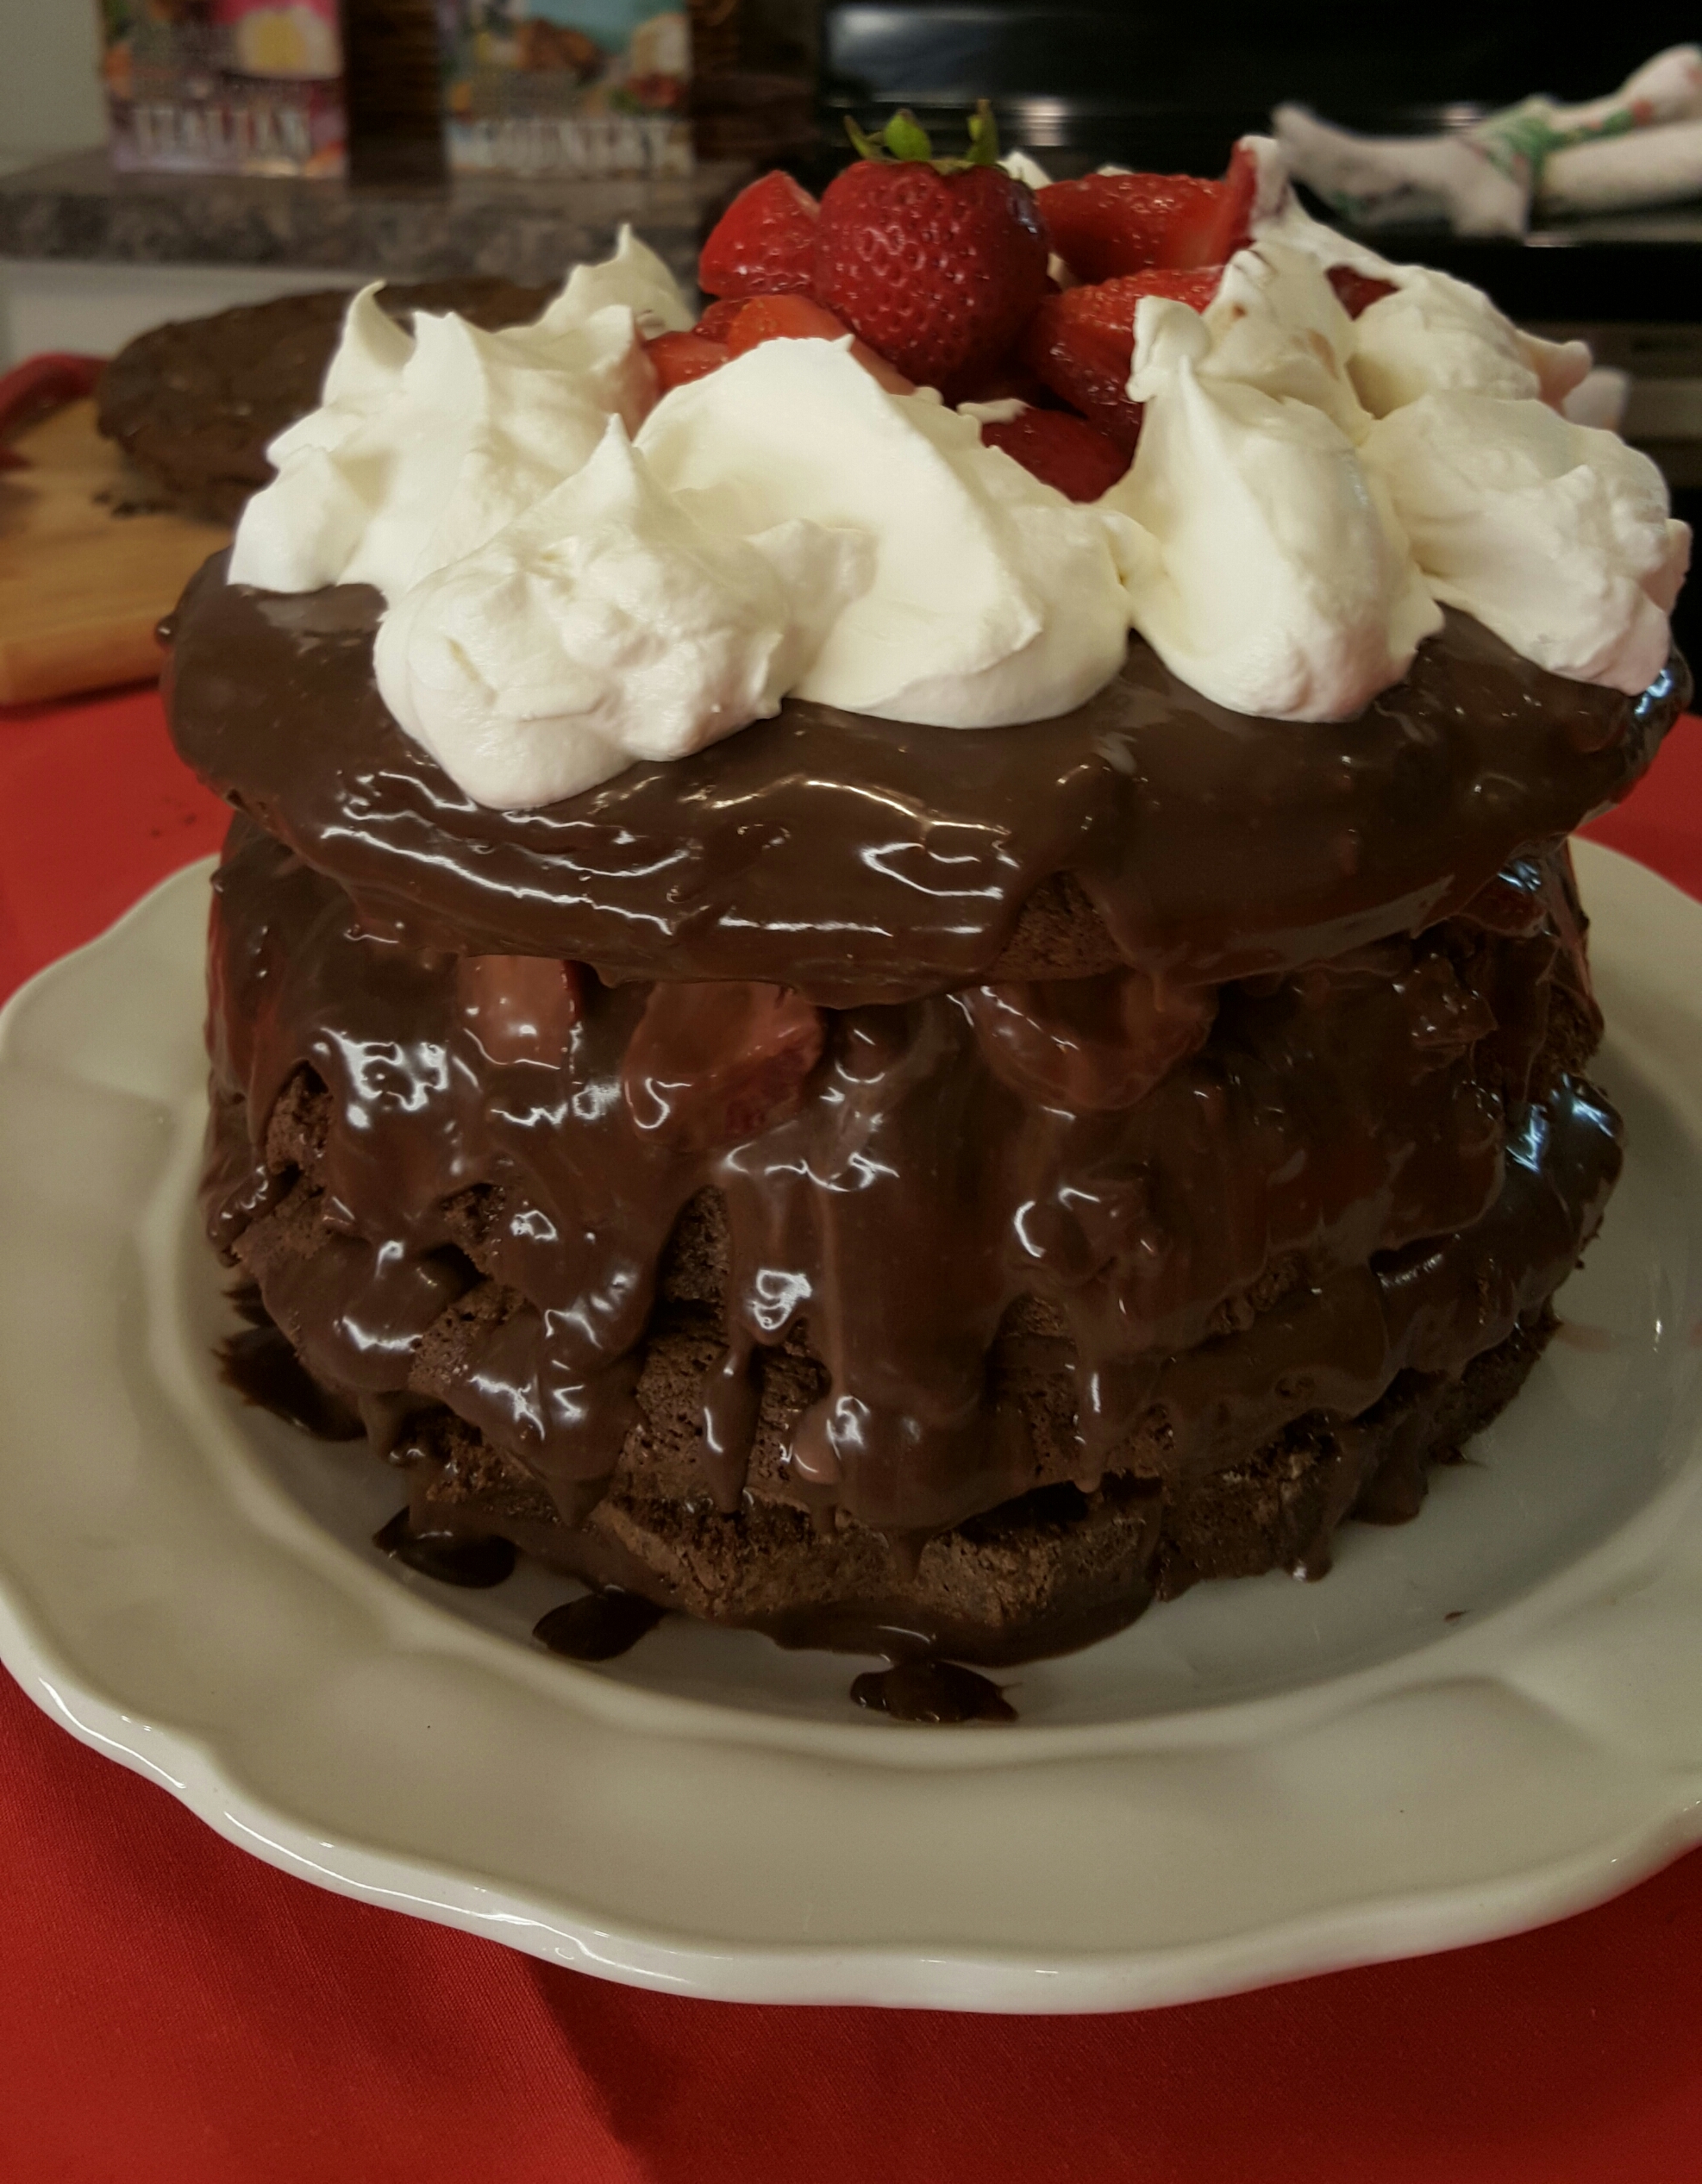 A chocolate cake with whipped cream and strawberries on top.